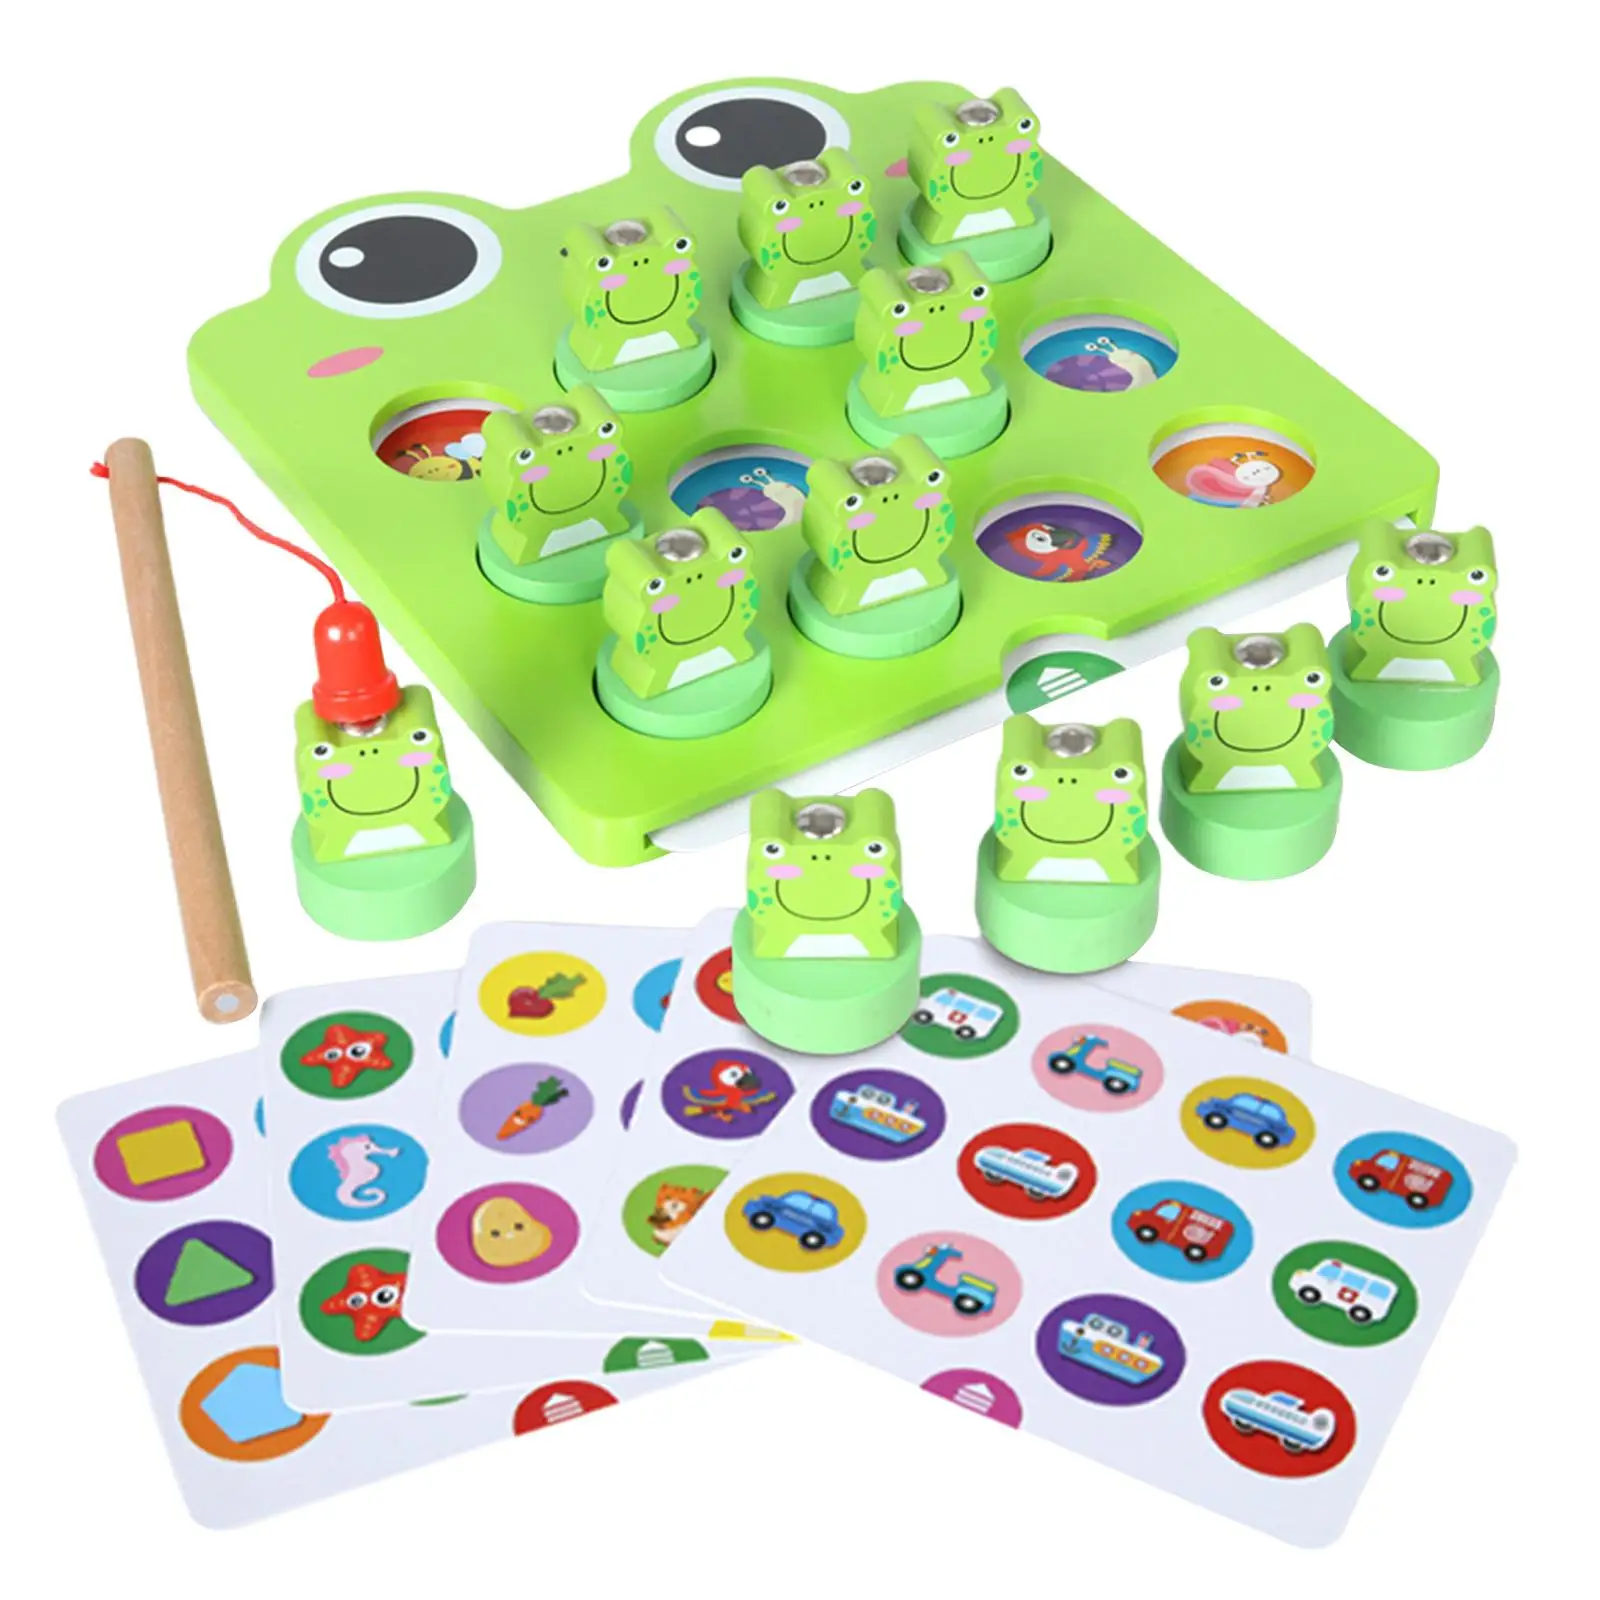 Children Magnetic Frog Fishing Game Toy for Toddlers Cognition Education Great Gifts for Boys and Girls Lightweight Christmas